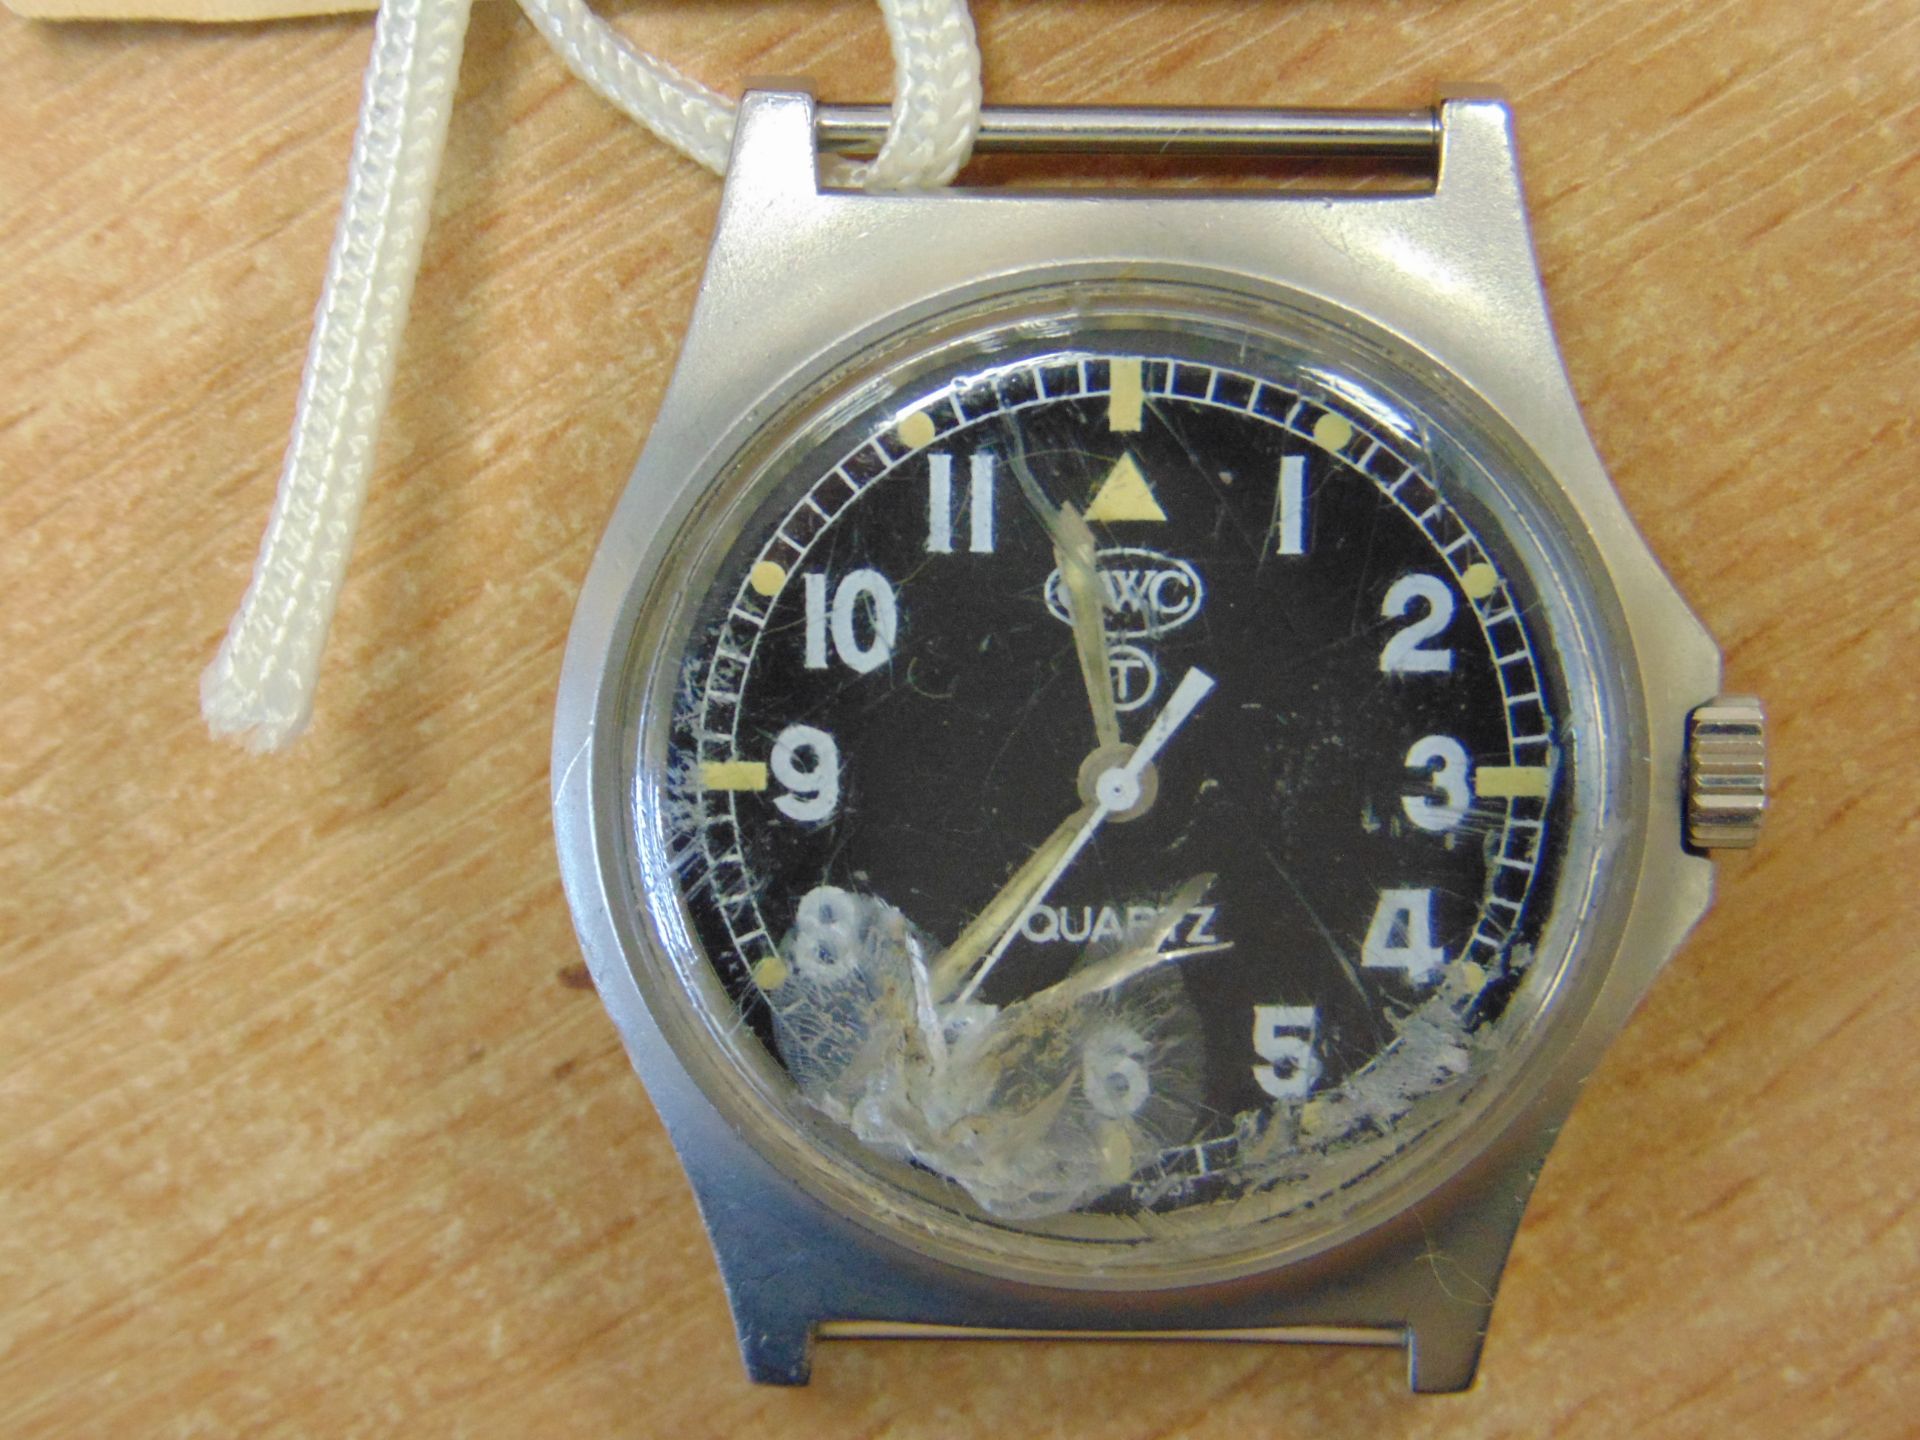 CWC W10 BRITISH ARMY SERVICE WATCH -WATER RESISTANT TO 5 ATM NATO MARKS DATE 2005 *CHIP IN GLASS*